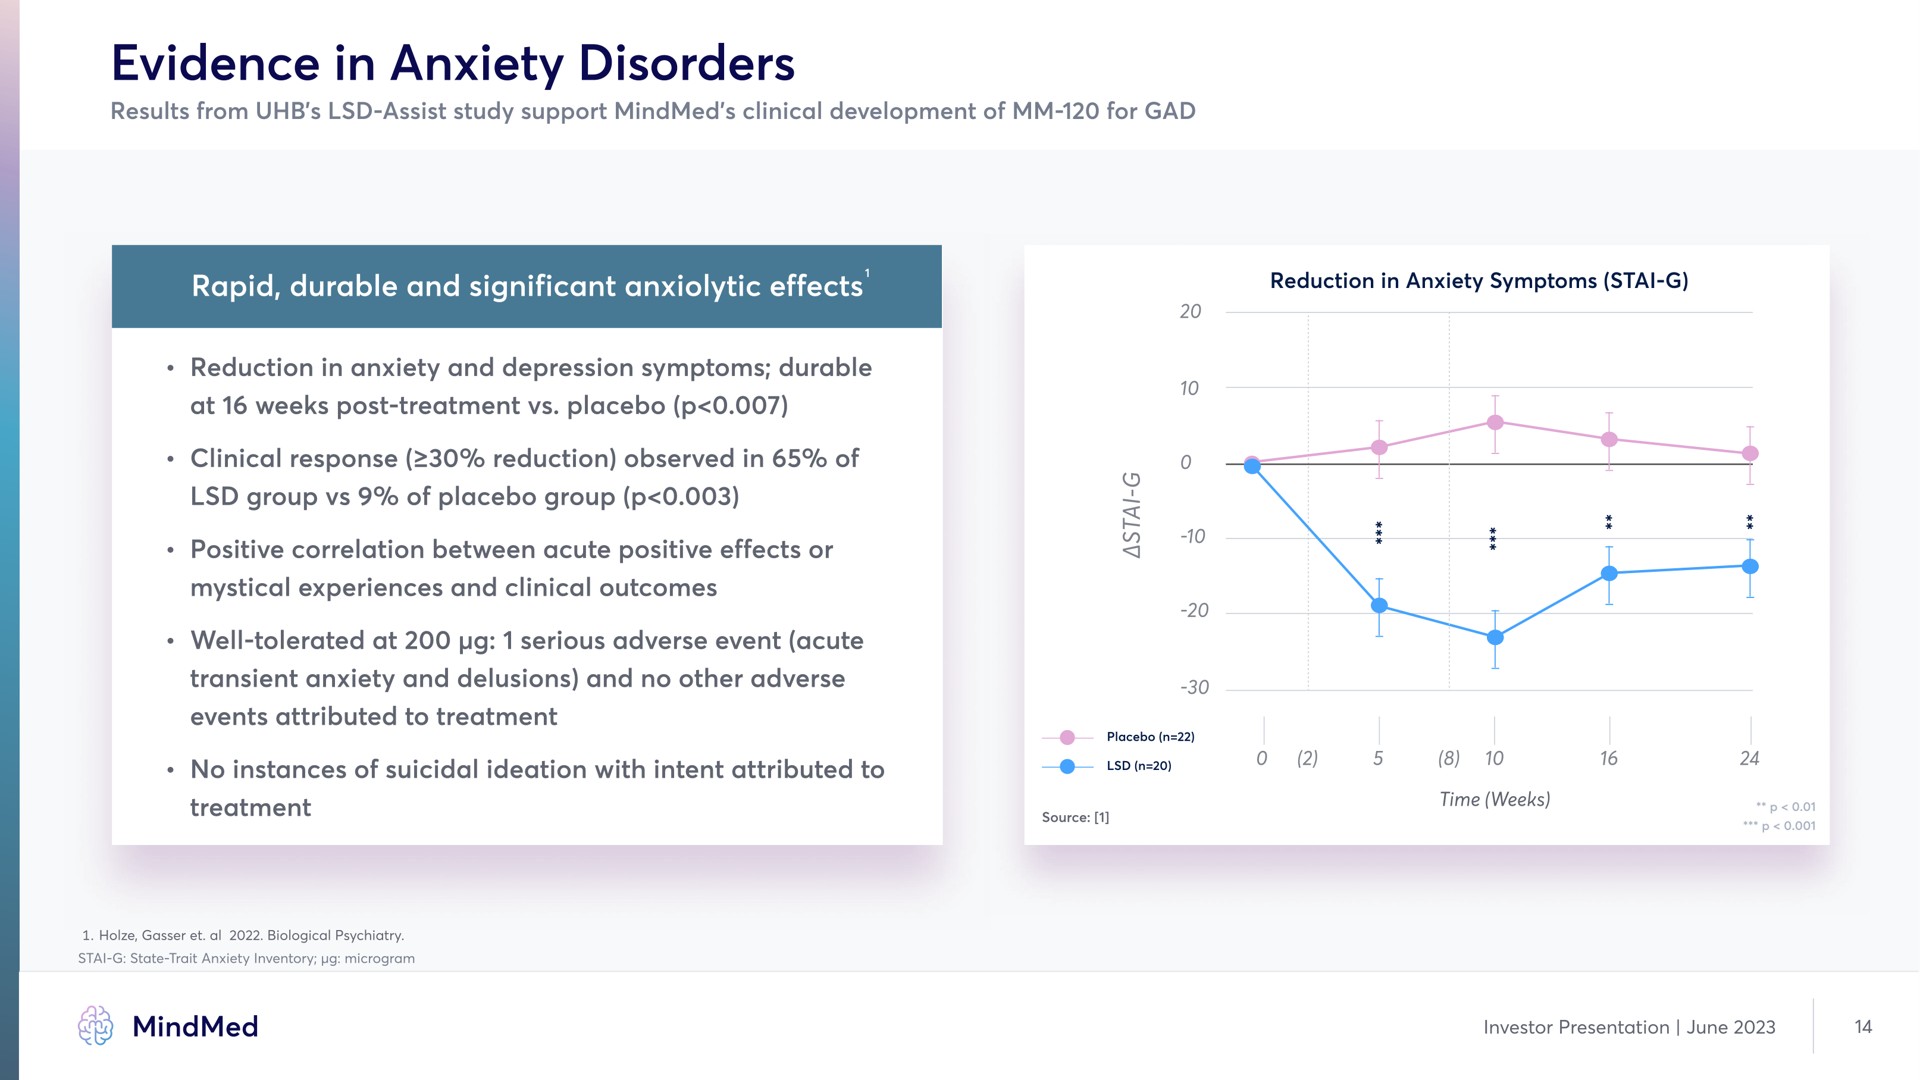 evidence in anxiety disorders rapid durable and significant effects reduction symptoms | MindMed